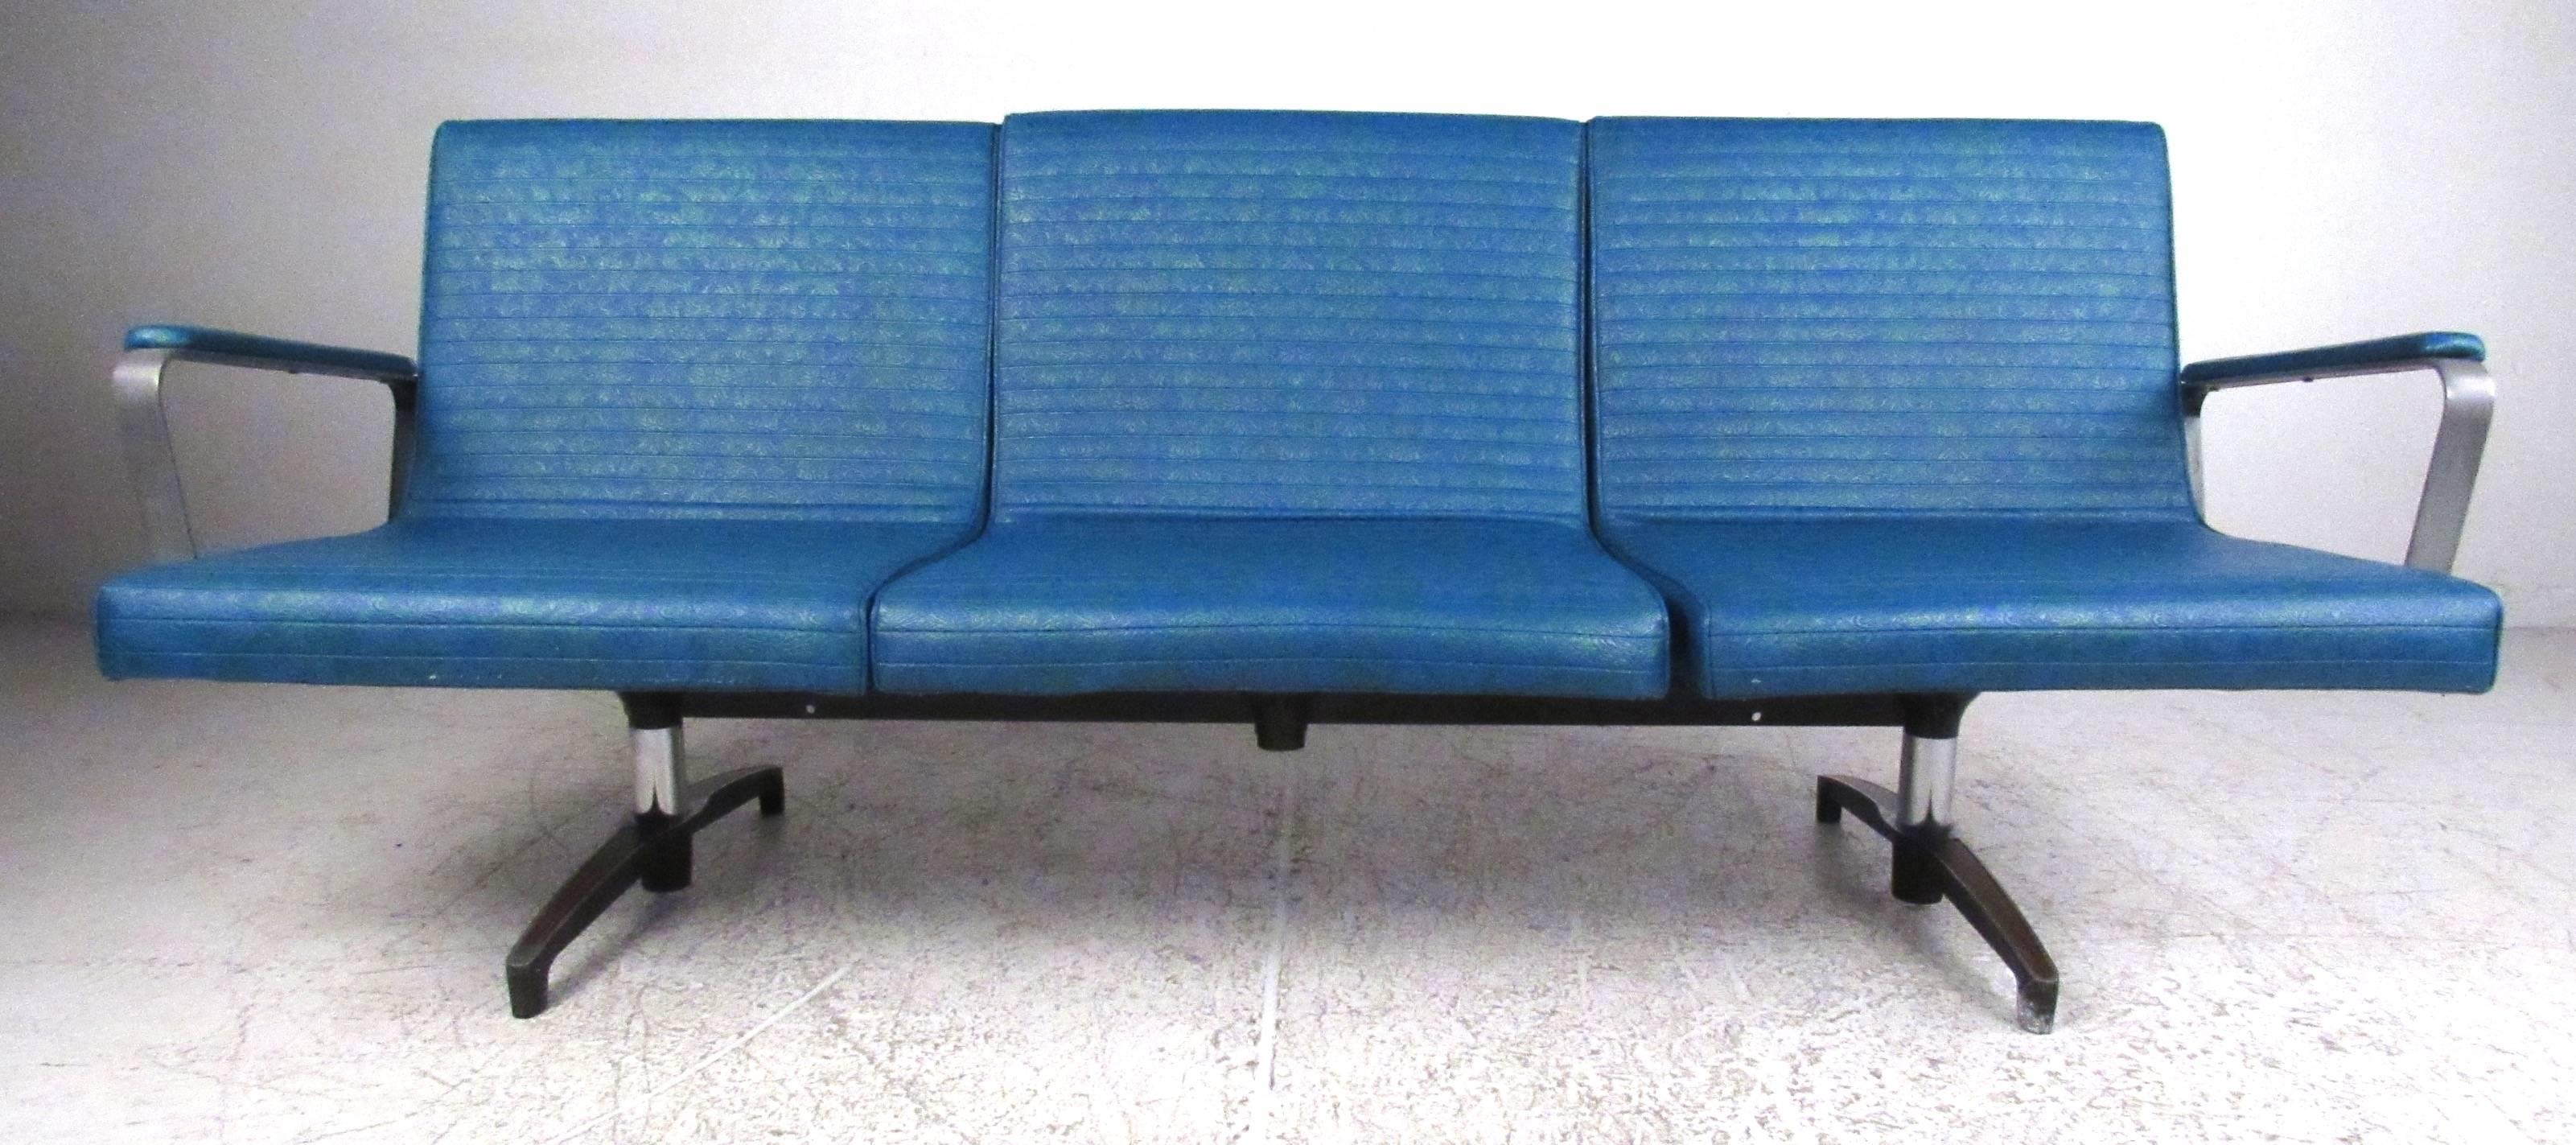 Stylish and well-made midcentury industrial seating by Chromcraft Inc., Senatobia, Miss. Constructed from high quality materials for use in offices, this colorful stamped vinyl upholstery and aluminum frame will complement the home as well. Please